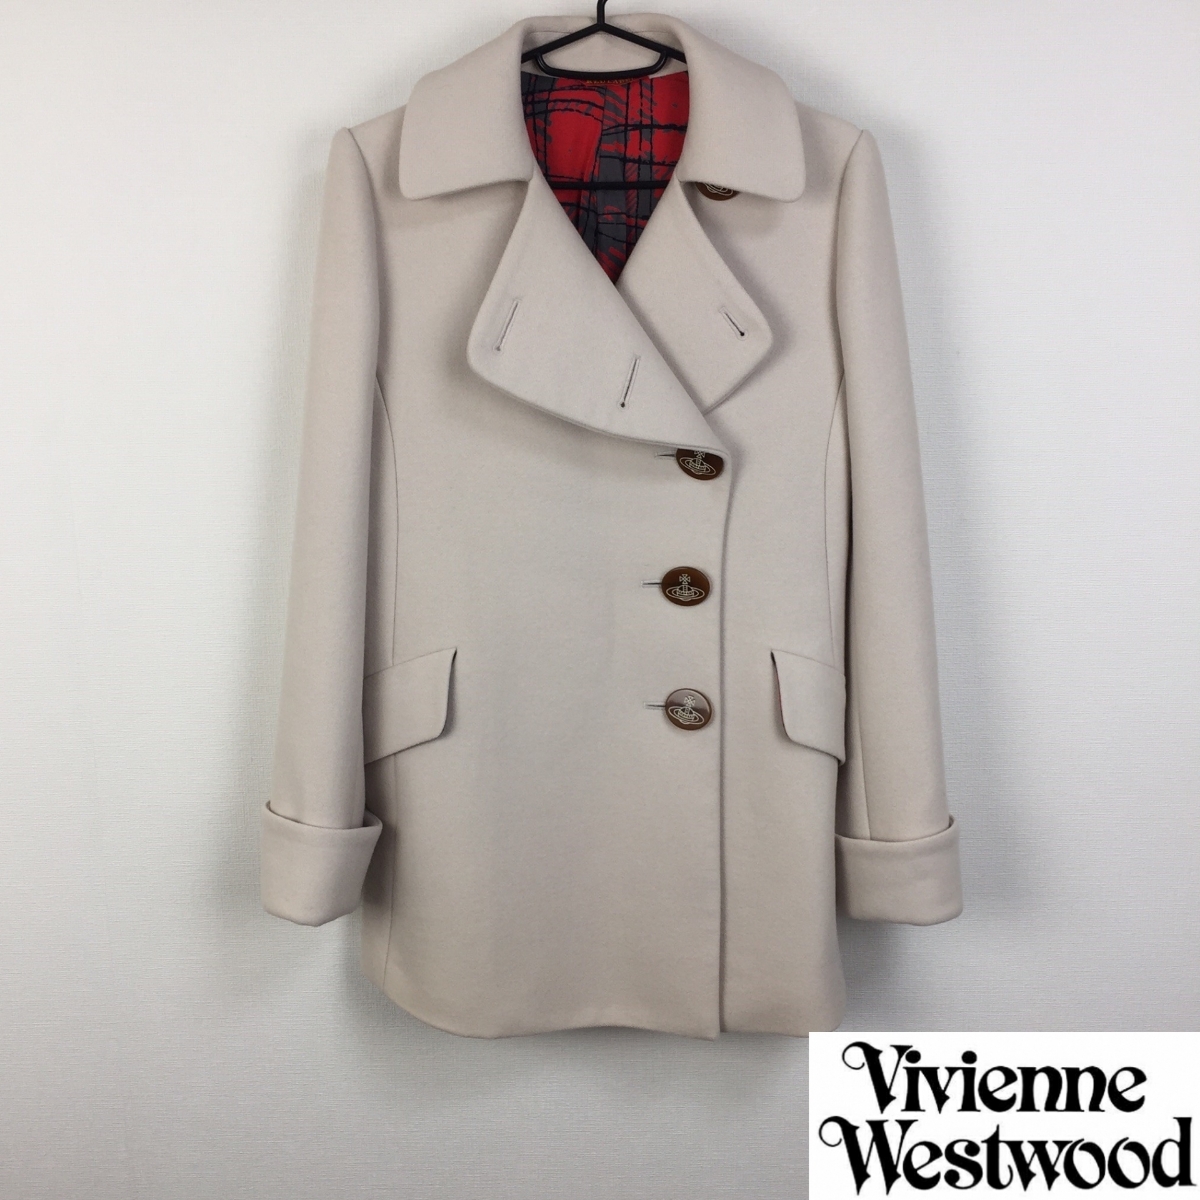  as good as new goods Vivienne Westwood red label melt n pea coat white group size 2 free shipping 